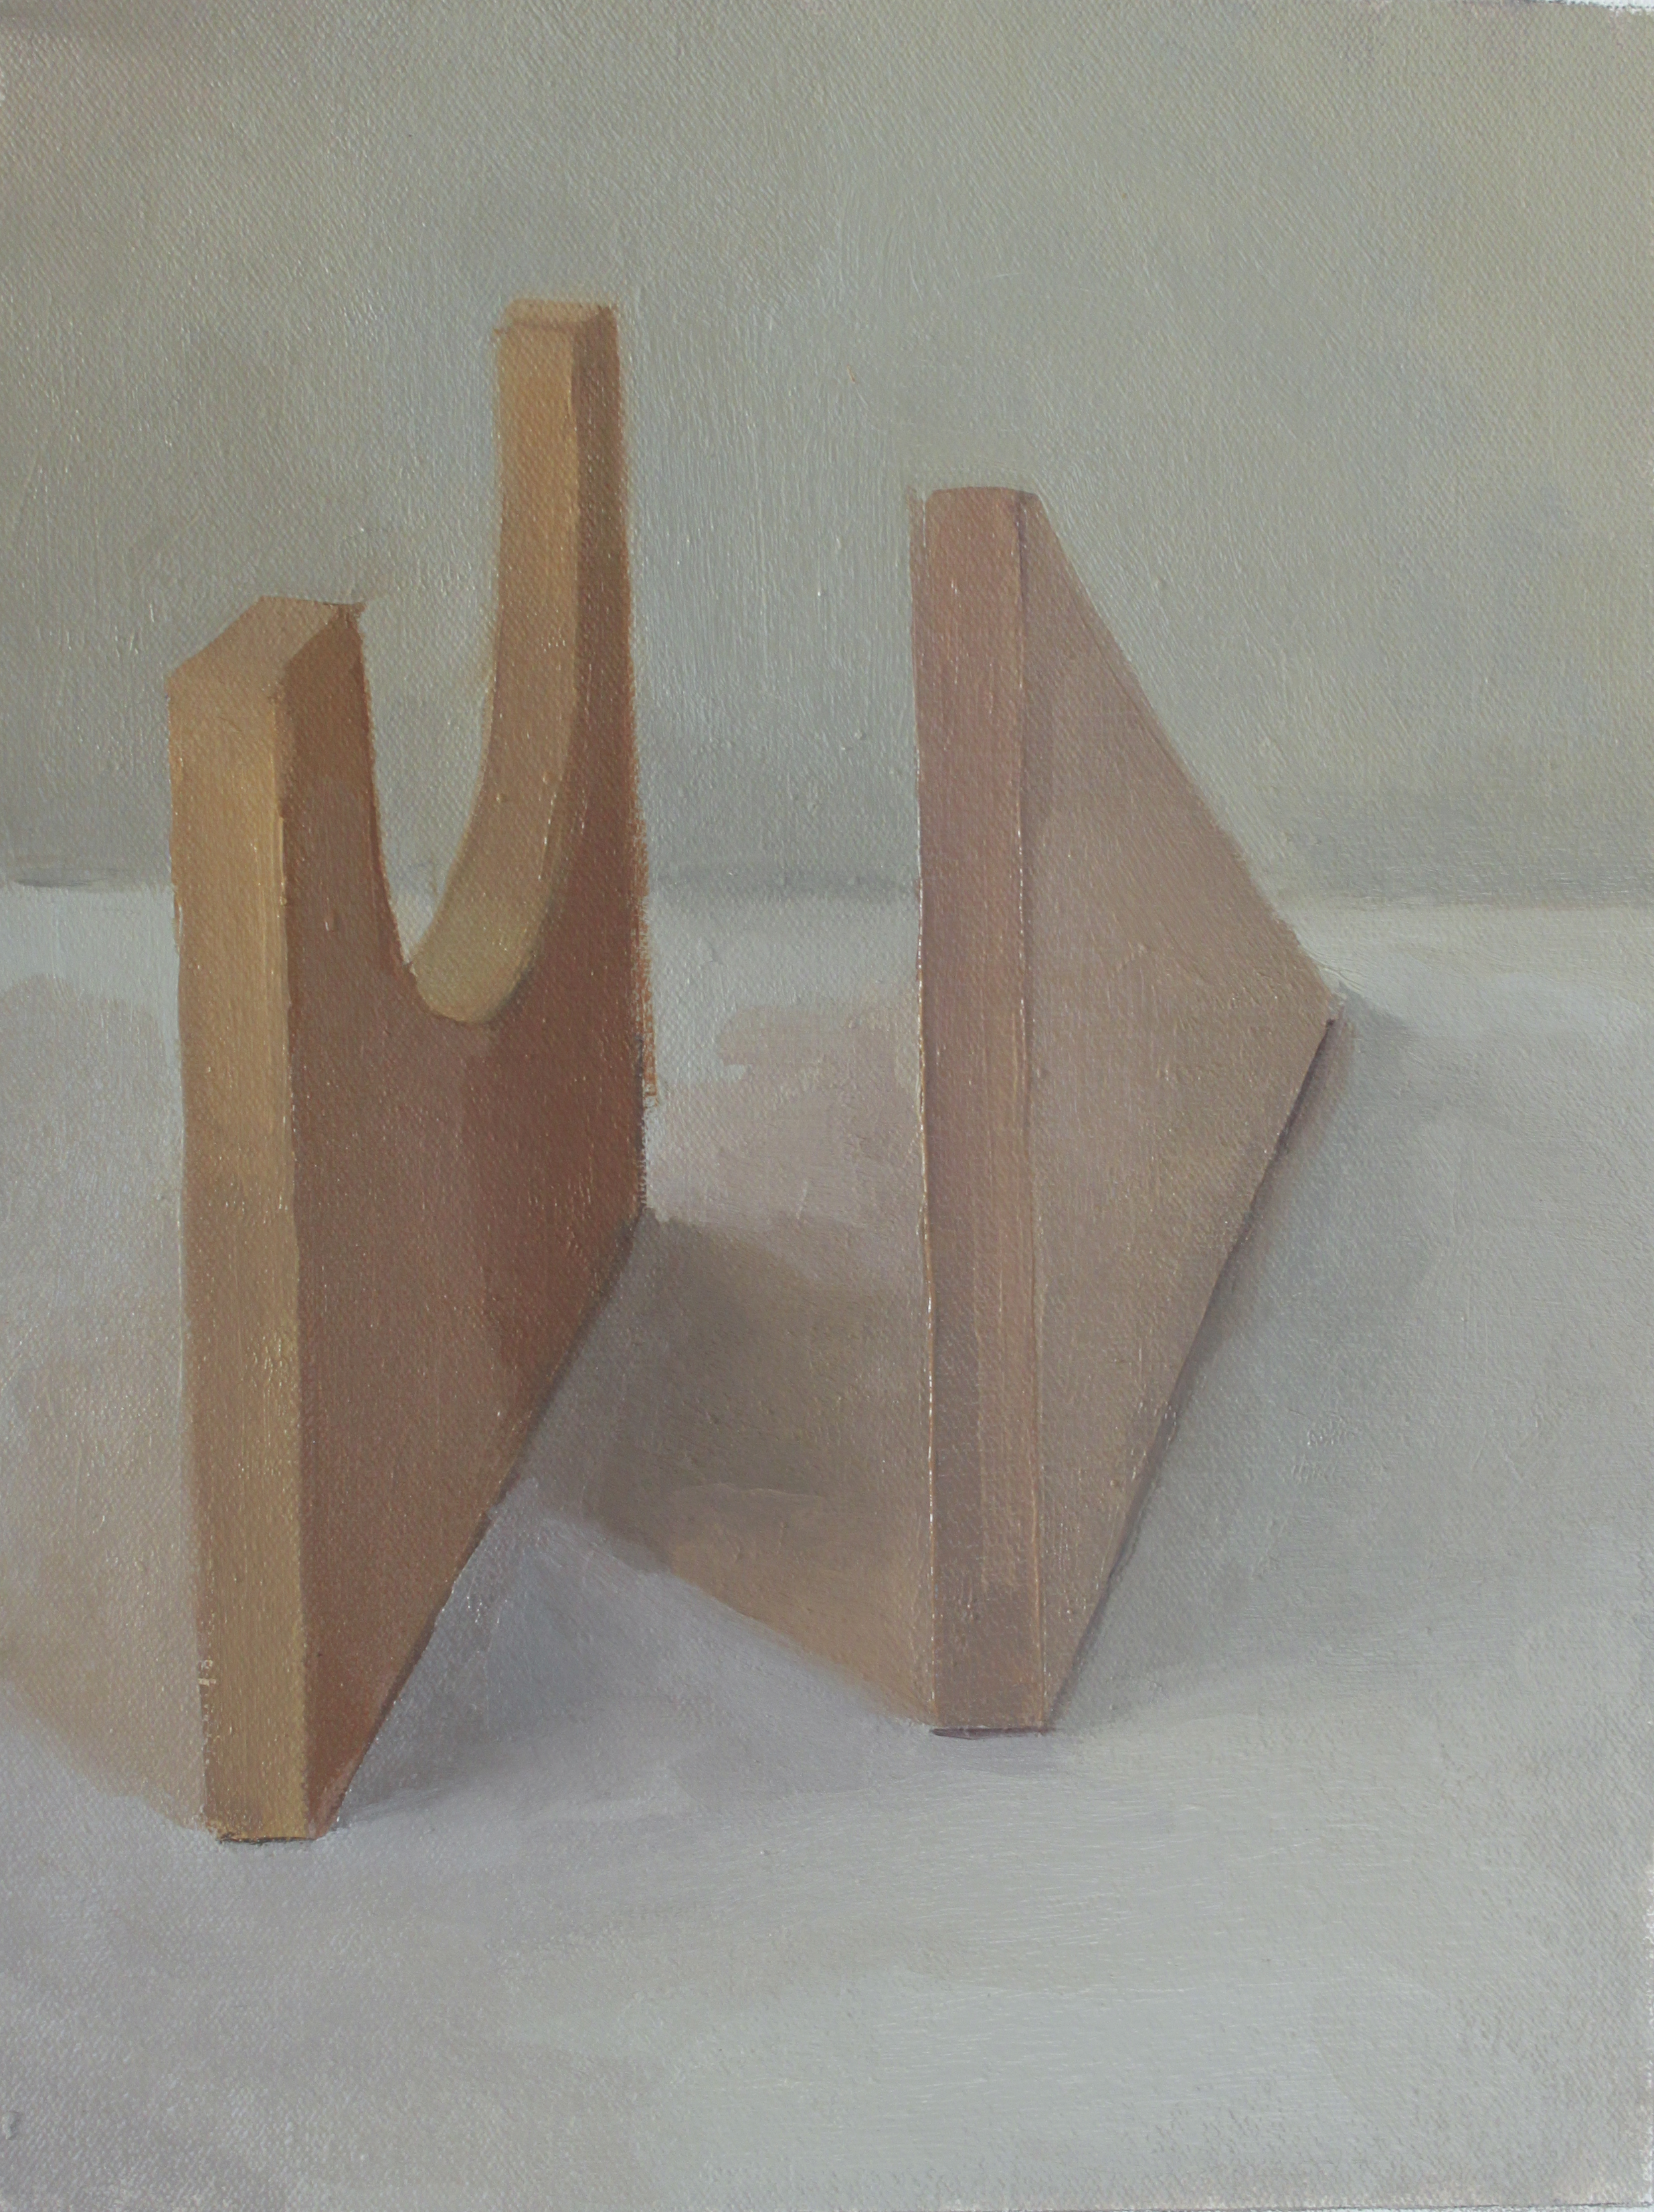    blocks     oil on canvas 9x12" 2012  collection of the artist 